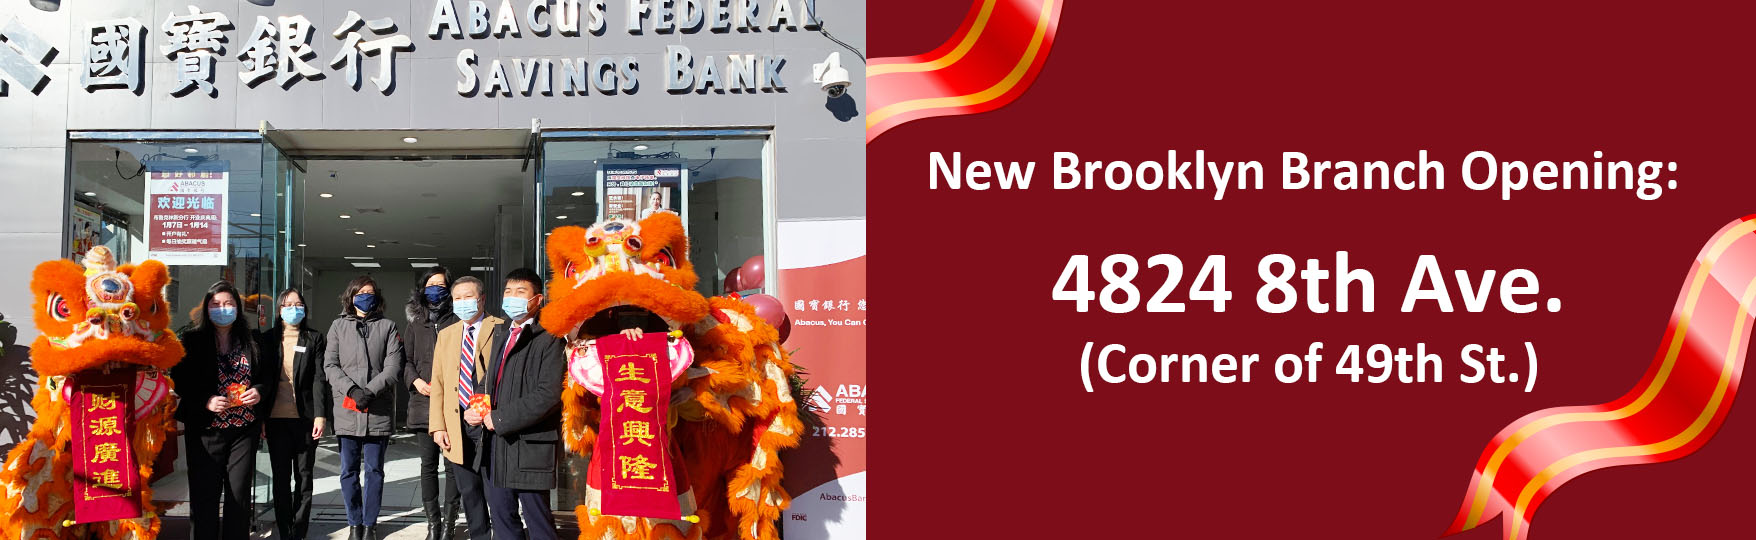 New Brooklyn Branch Opening: 4824 8th Ave (Corner of 49th st.)